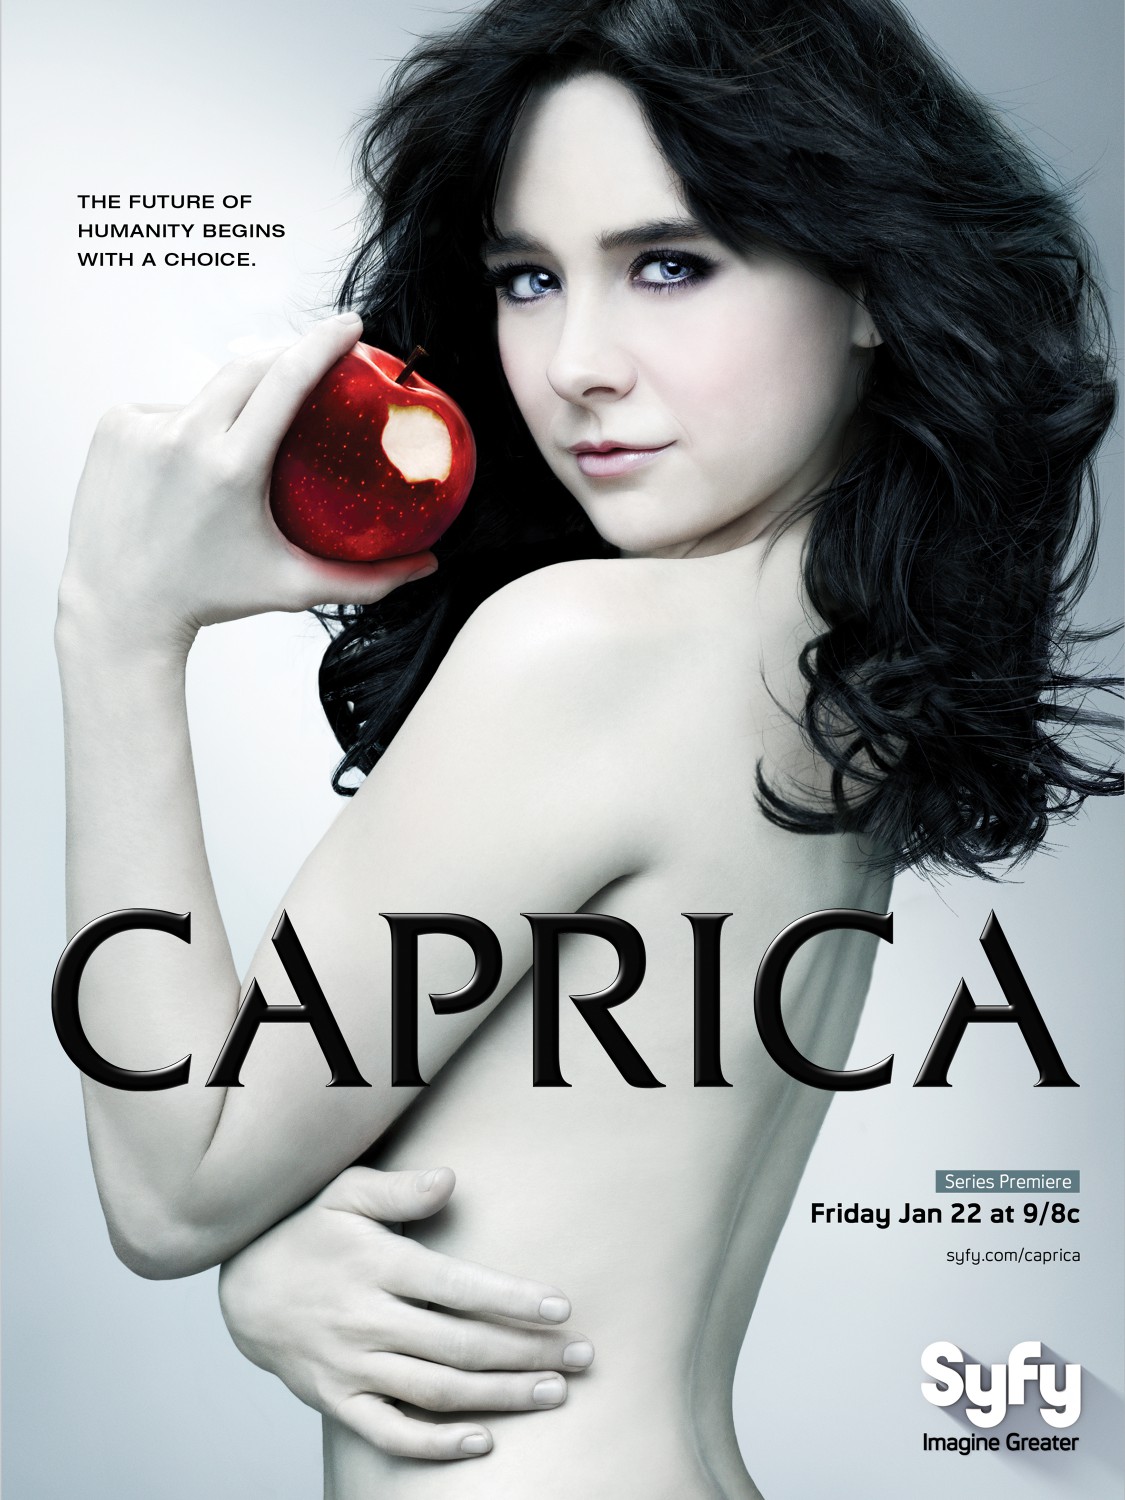 Extra Large TV Poster Image for Caprica 